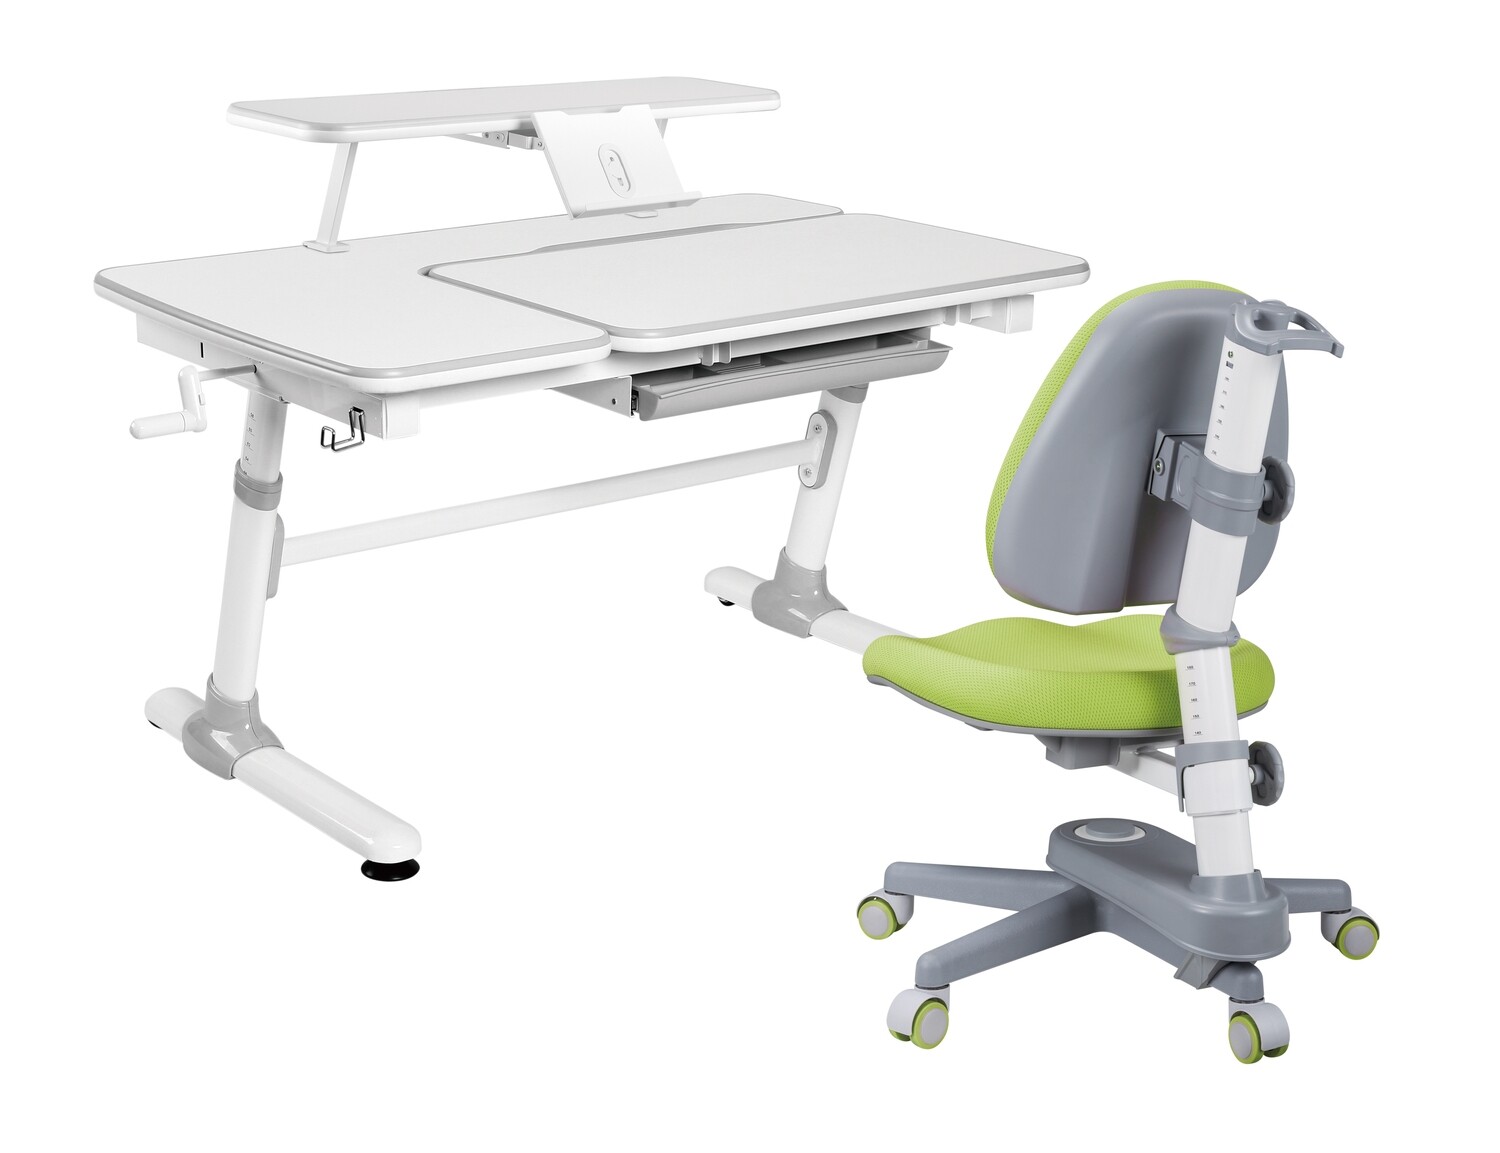 KIDOMATE Ergonomic Study Table with book shelf and Chair for Kids/Students (Age : 3 +) - Grey color table